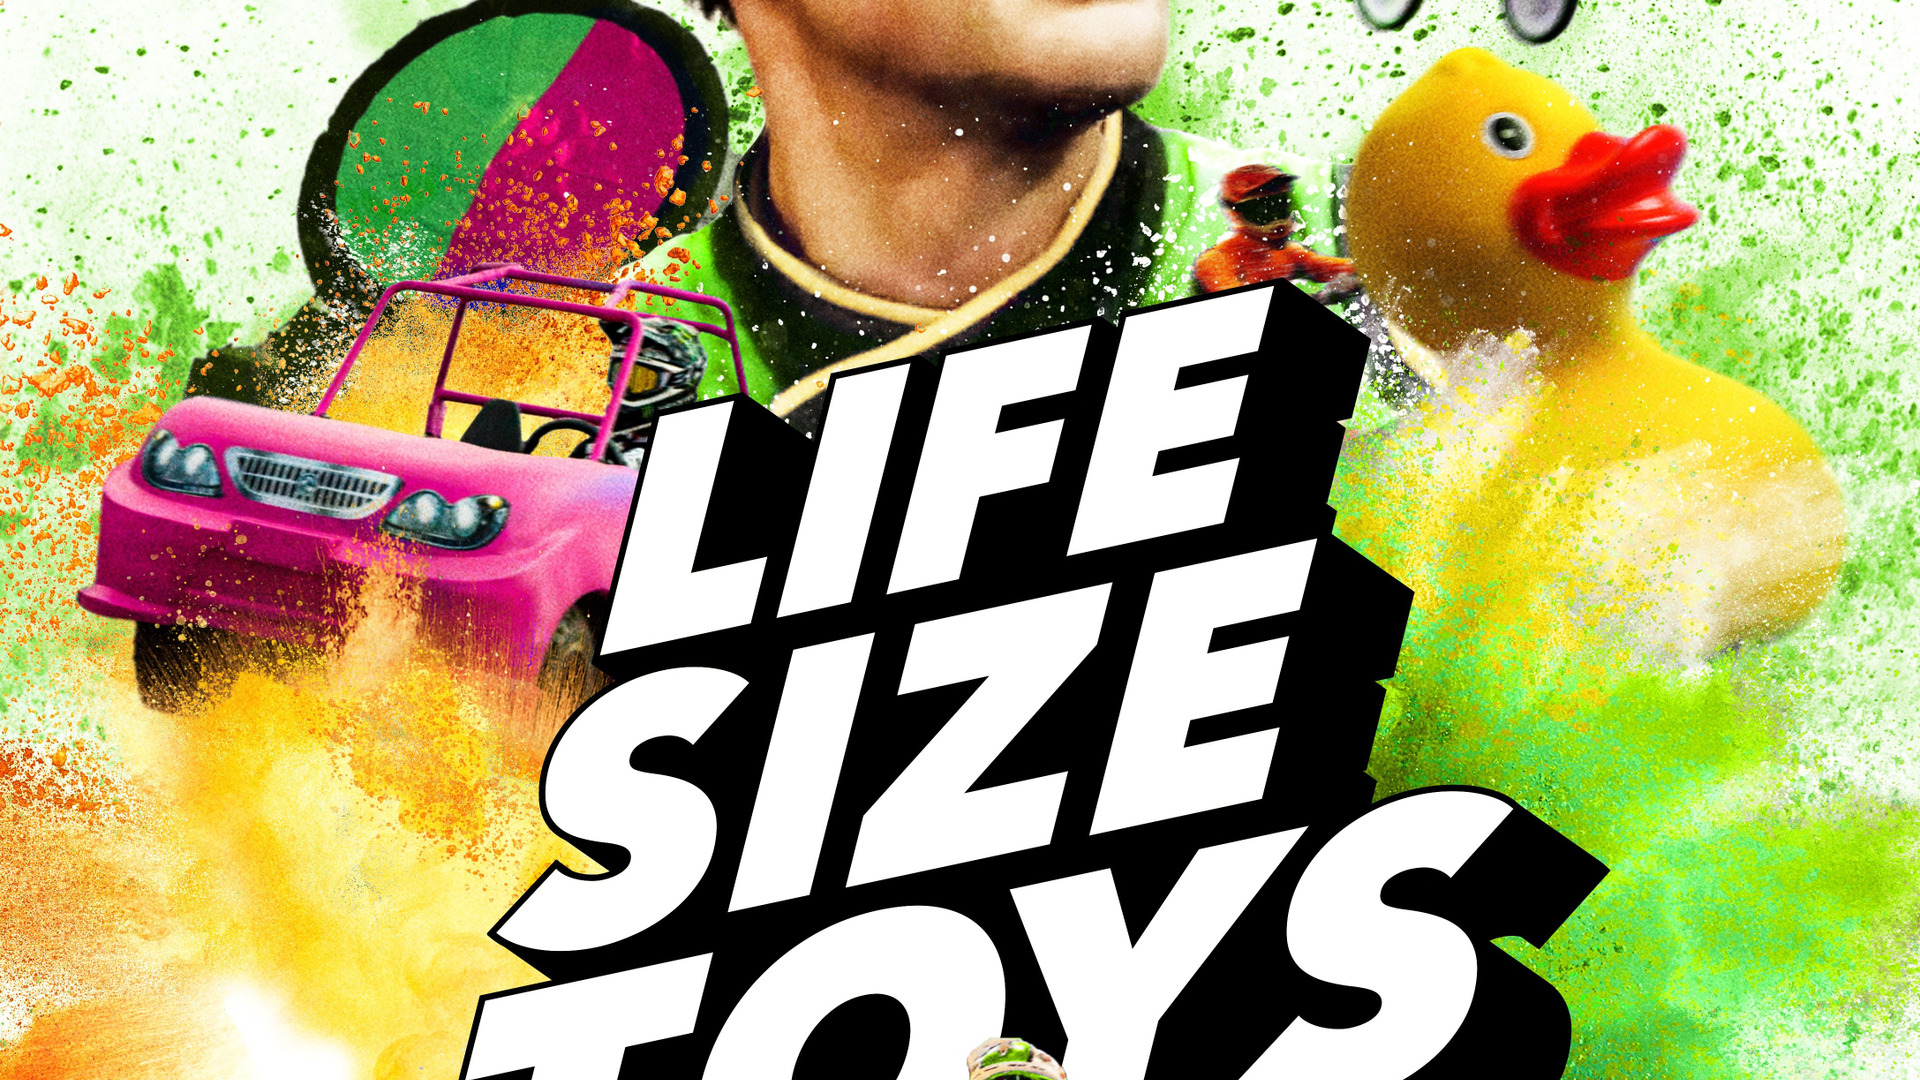 Show Life Size Toys